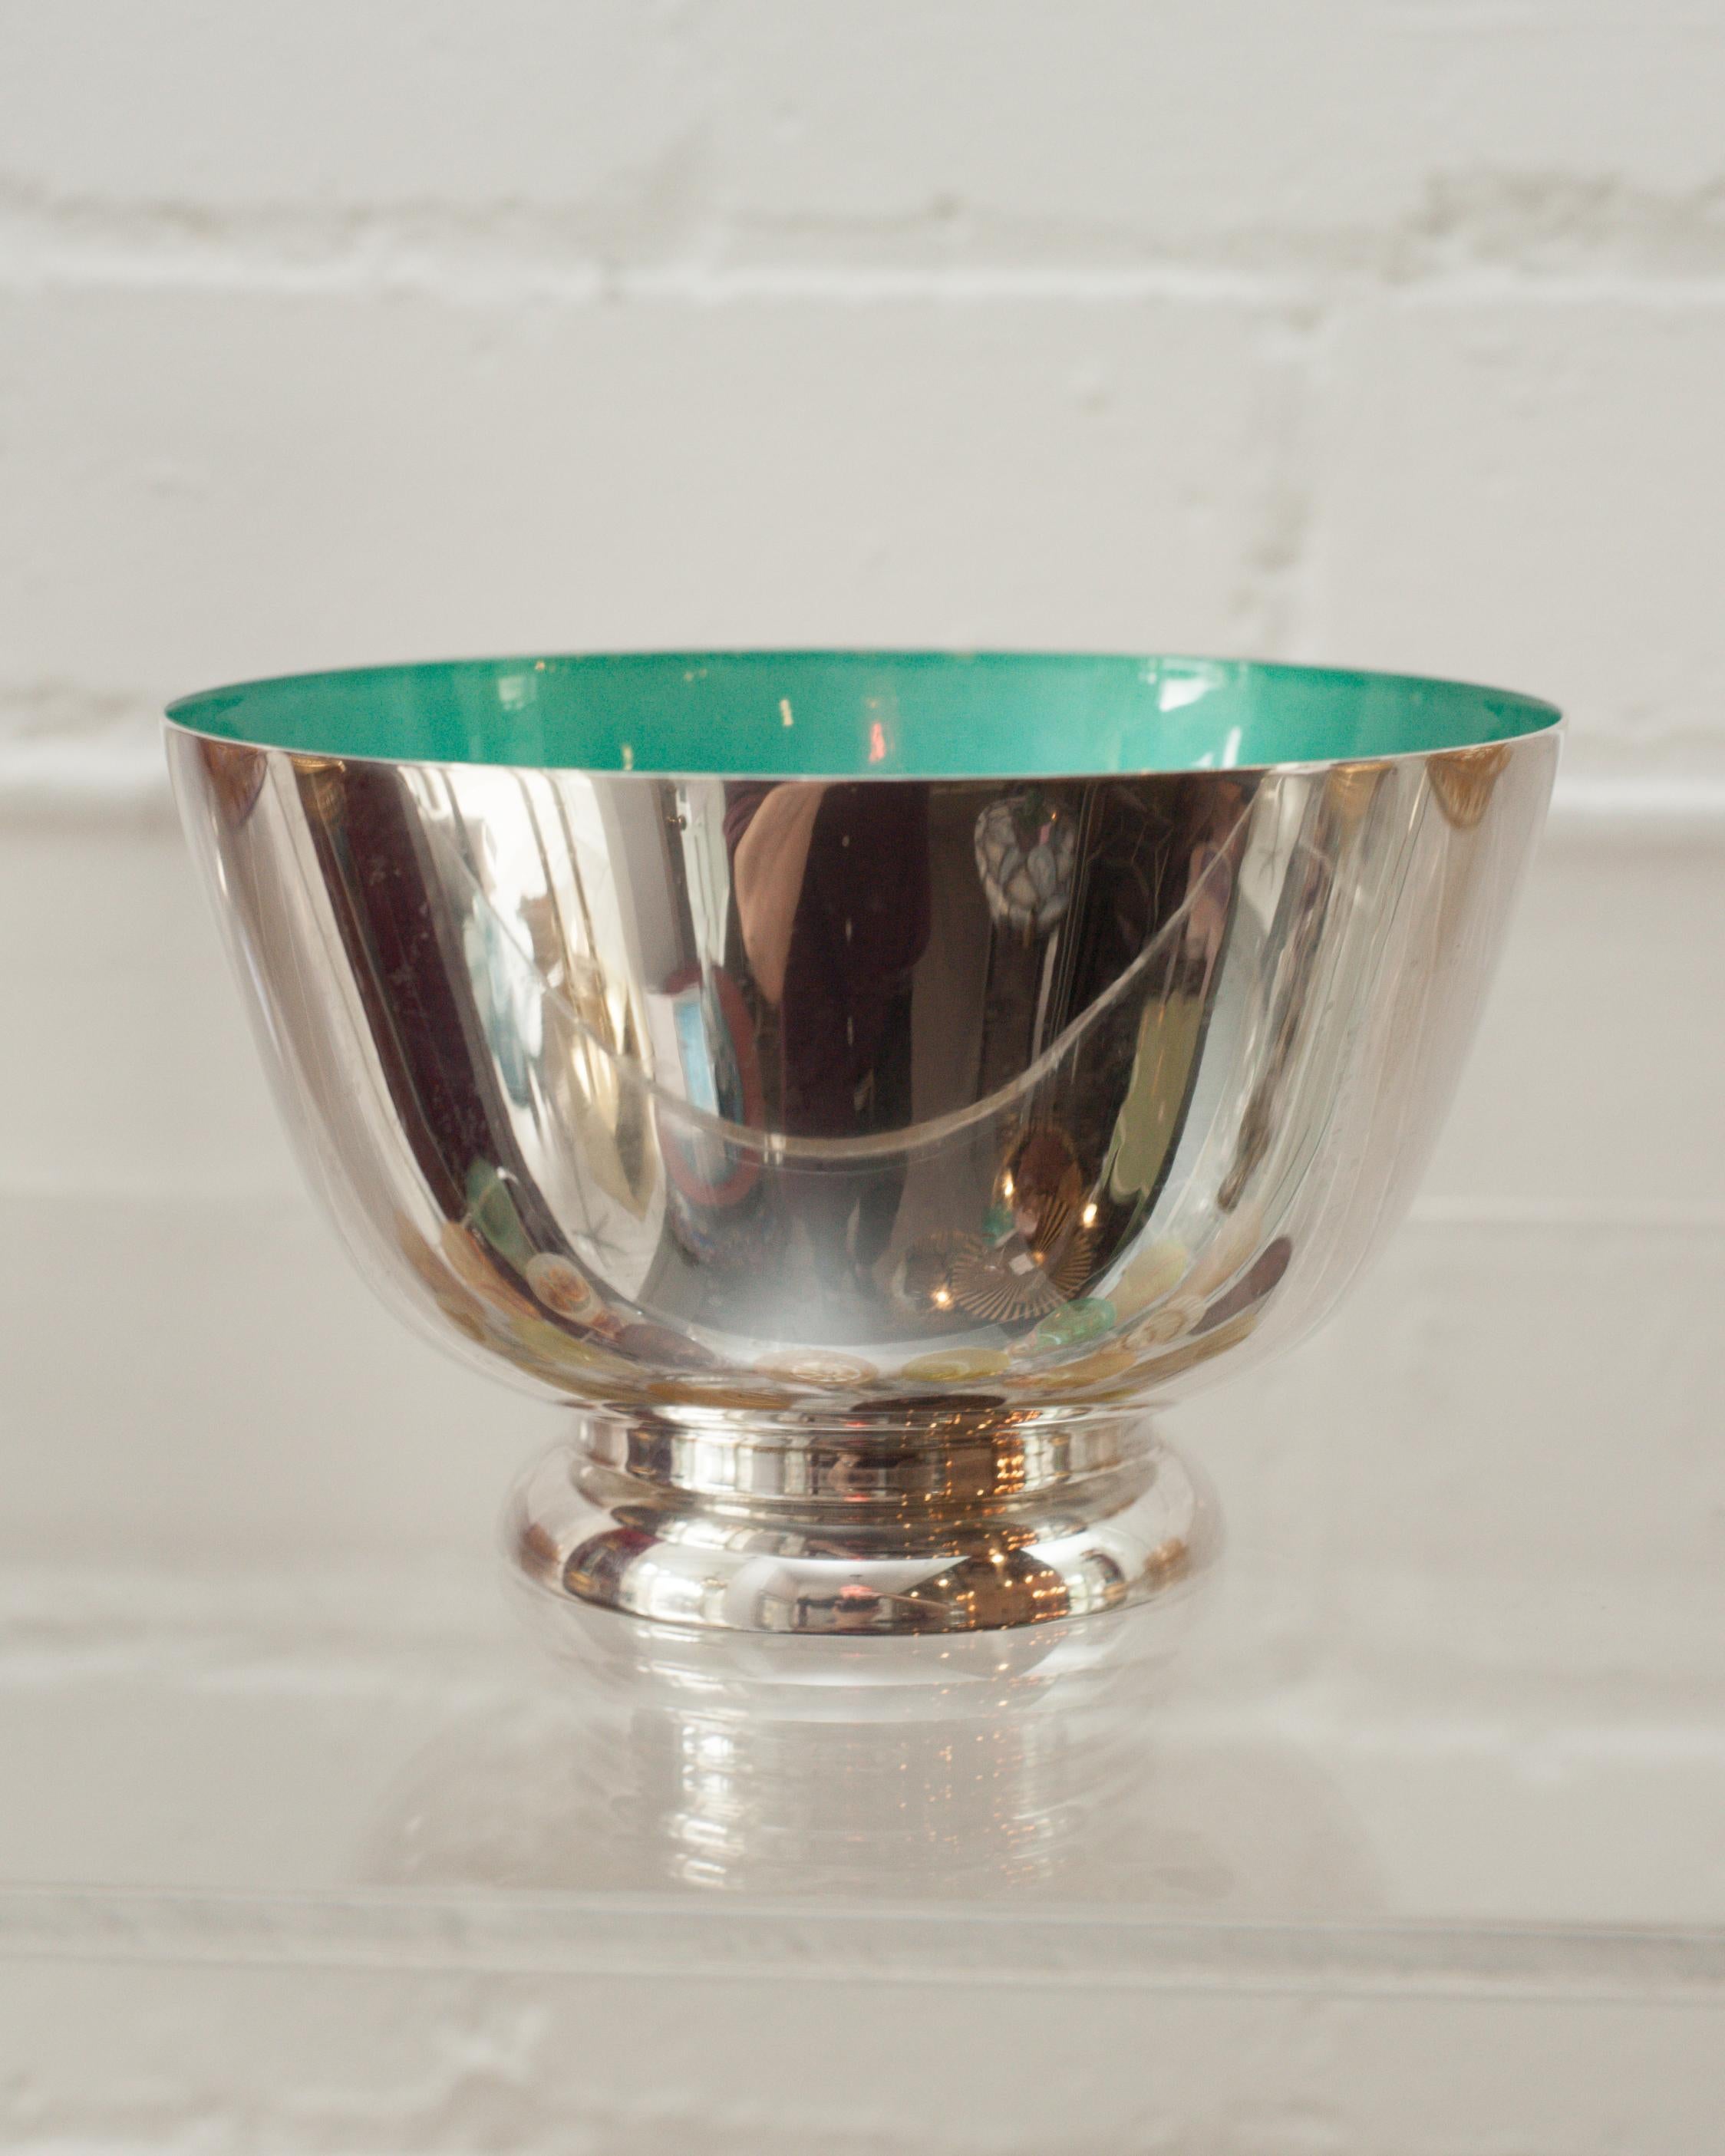 A beautiful midcentury sterling silver bowl with turquoise blue enamel lining. This Revere style bowl is perfect for fruits, candies, nuts. Due to the vibrant interior color, this vessel is a beautiful empty as filled.